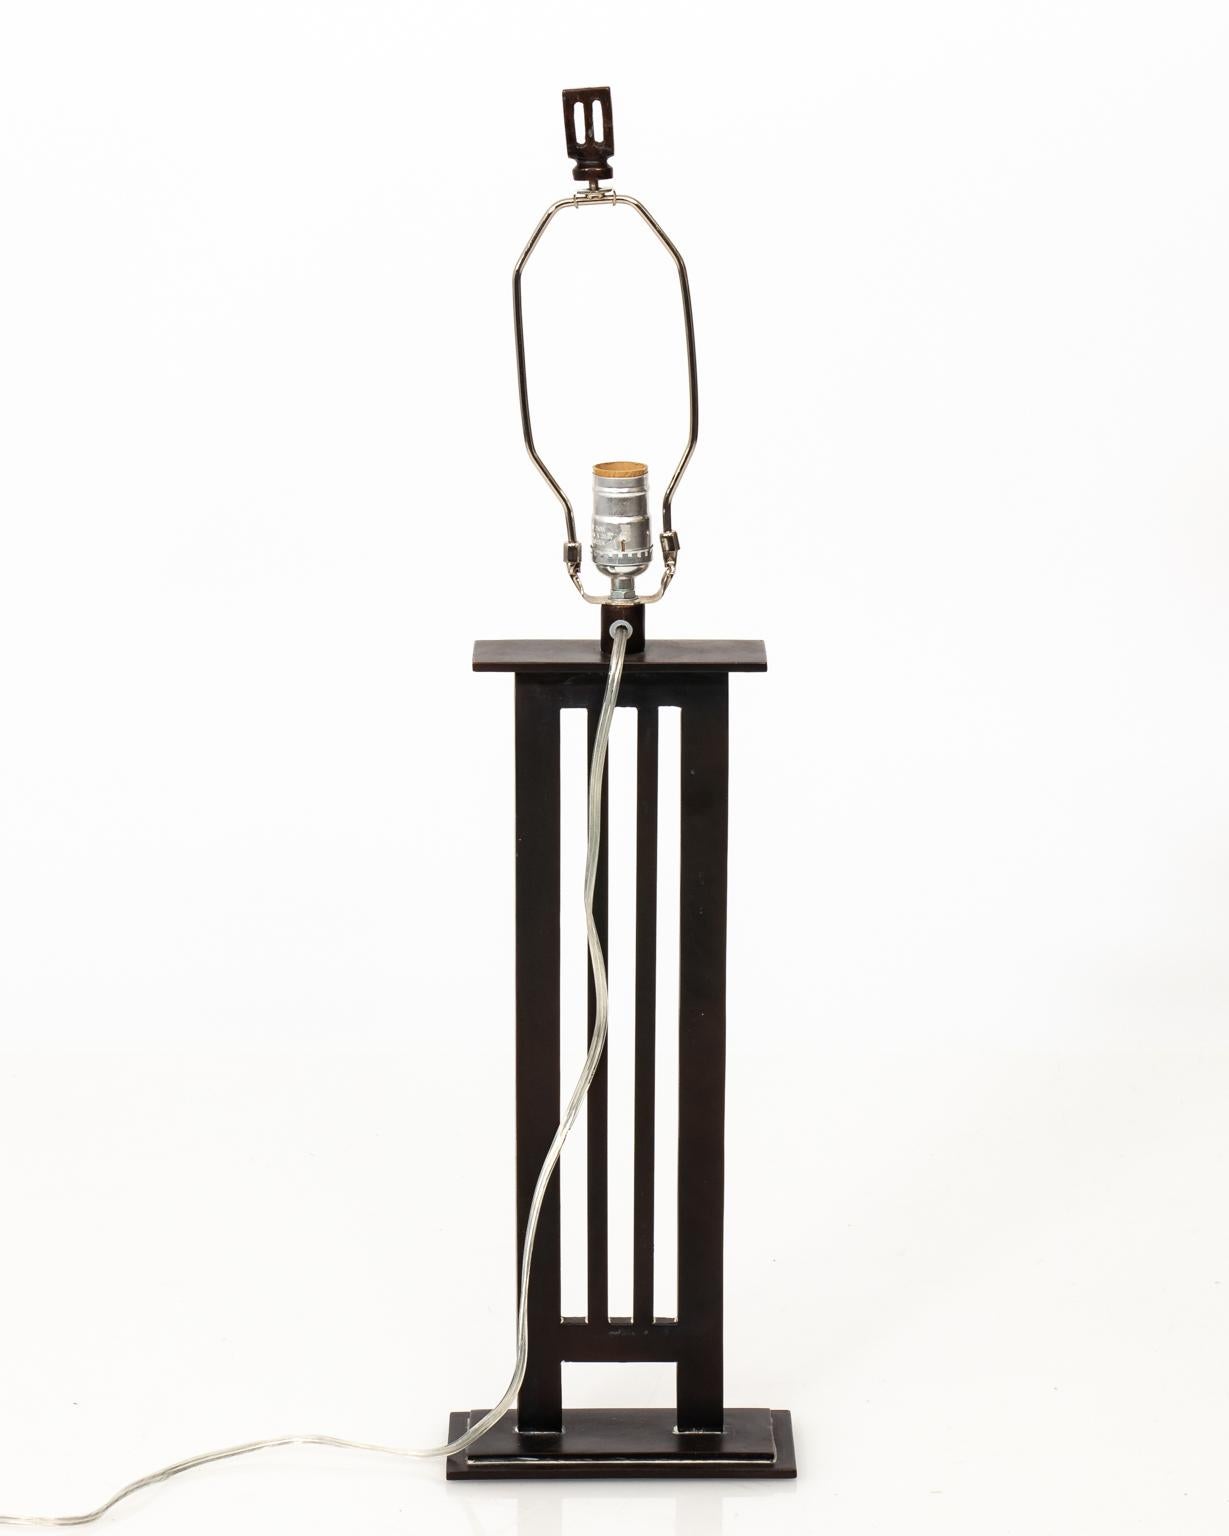 Contemporary pair of Iron column lamps with decorative drum shades in a black and white tribal print.
   